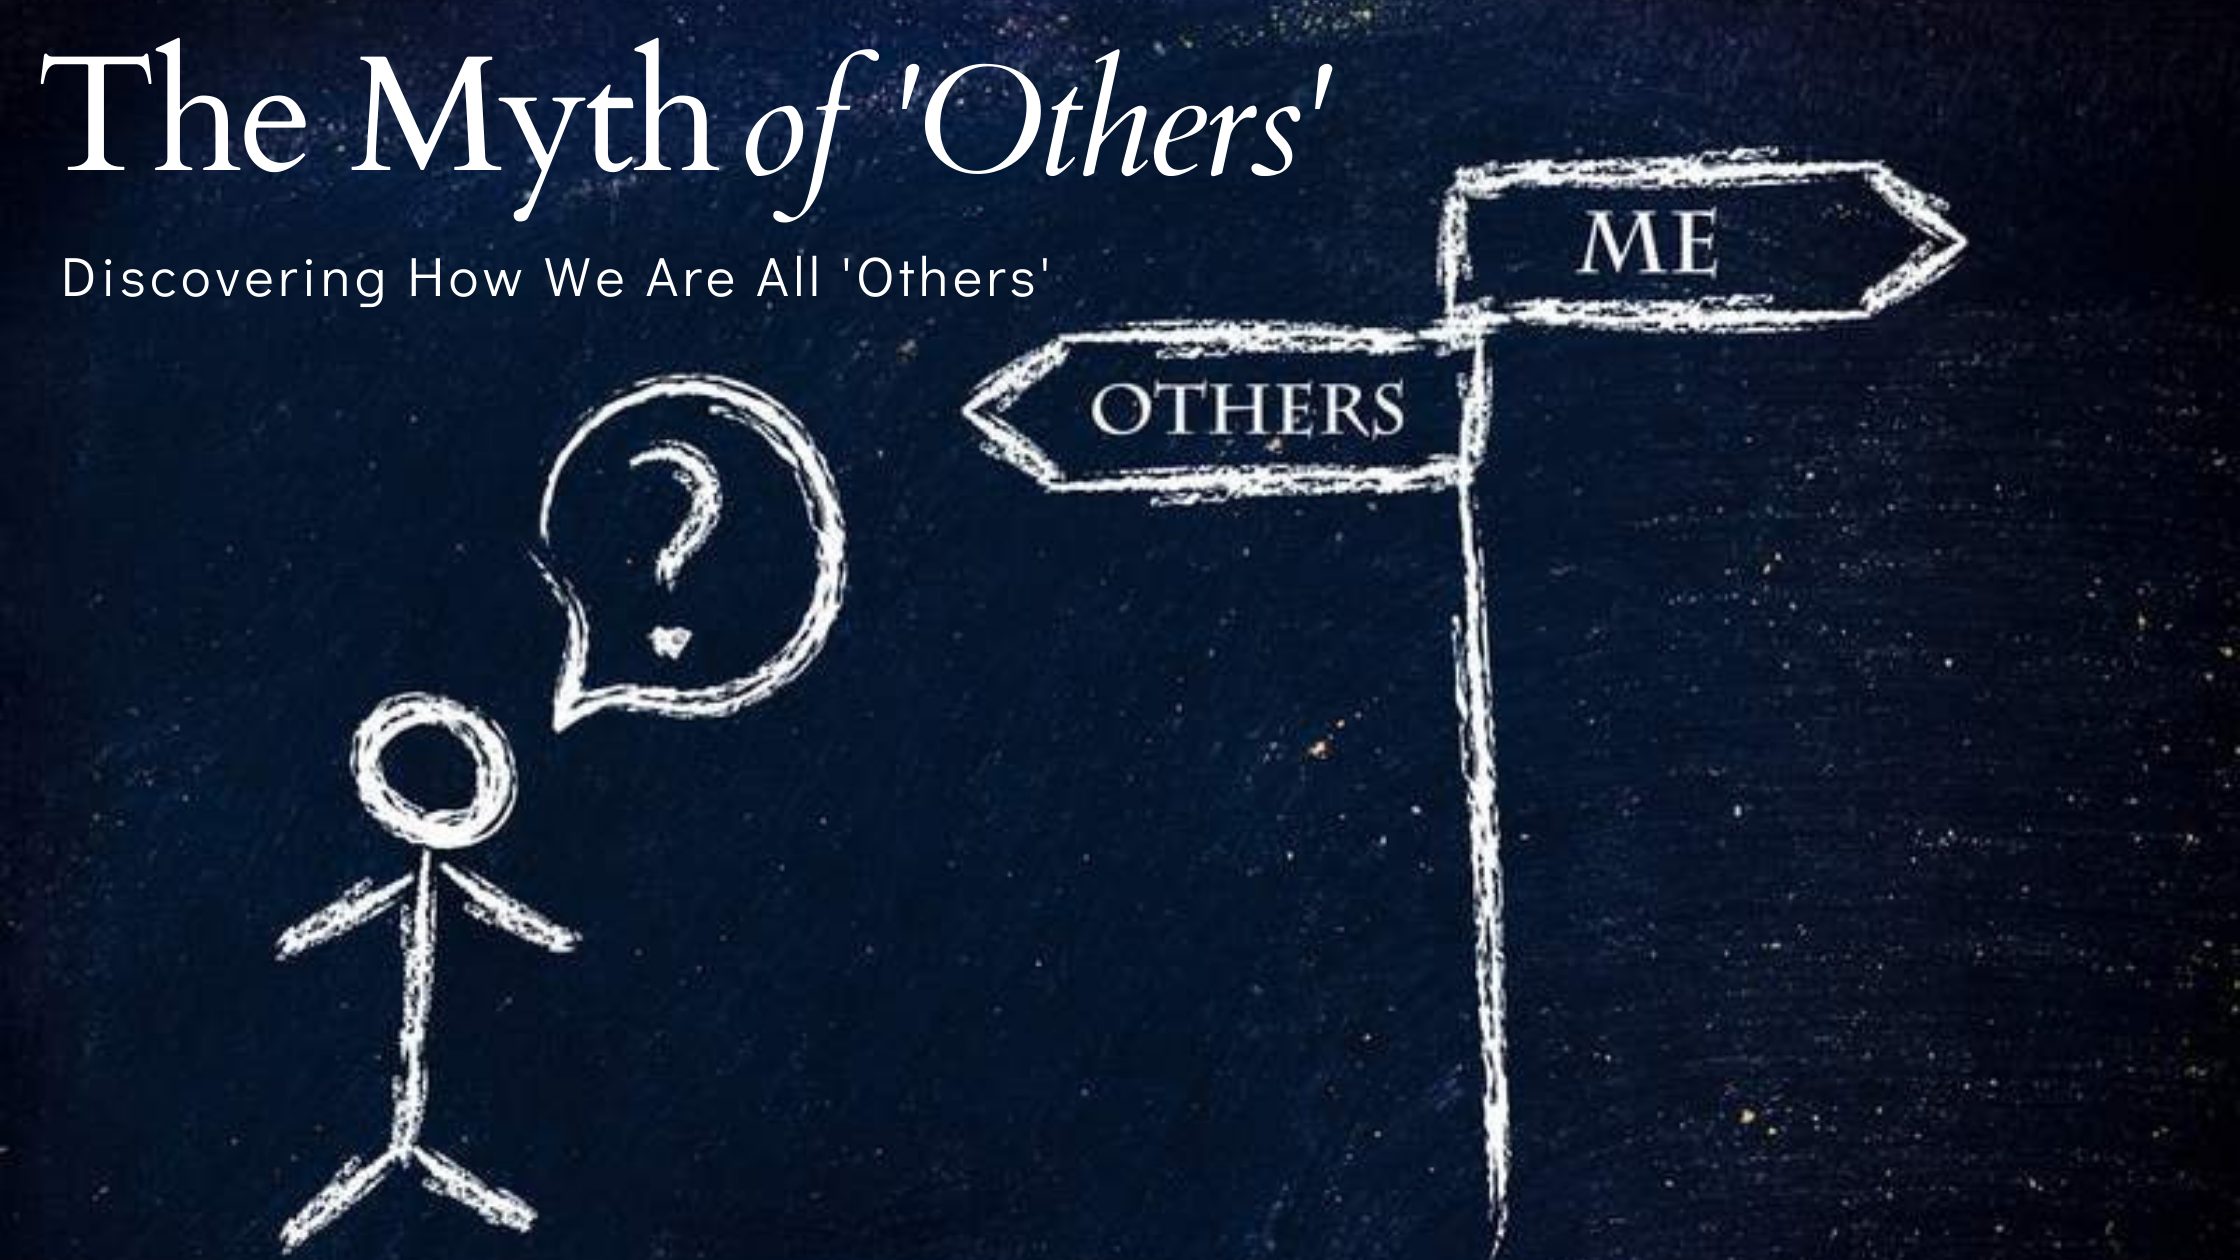 The myth of others